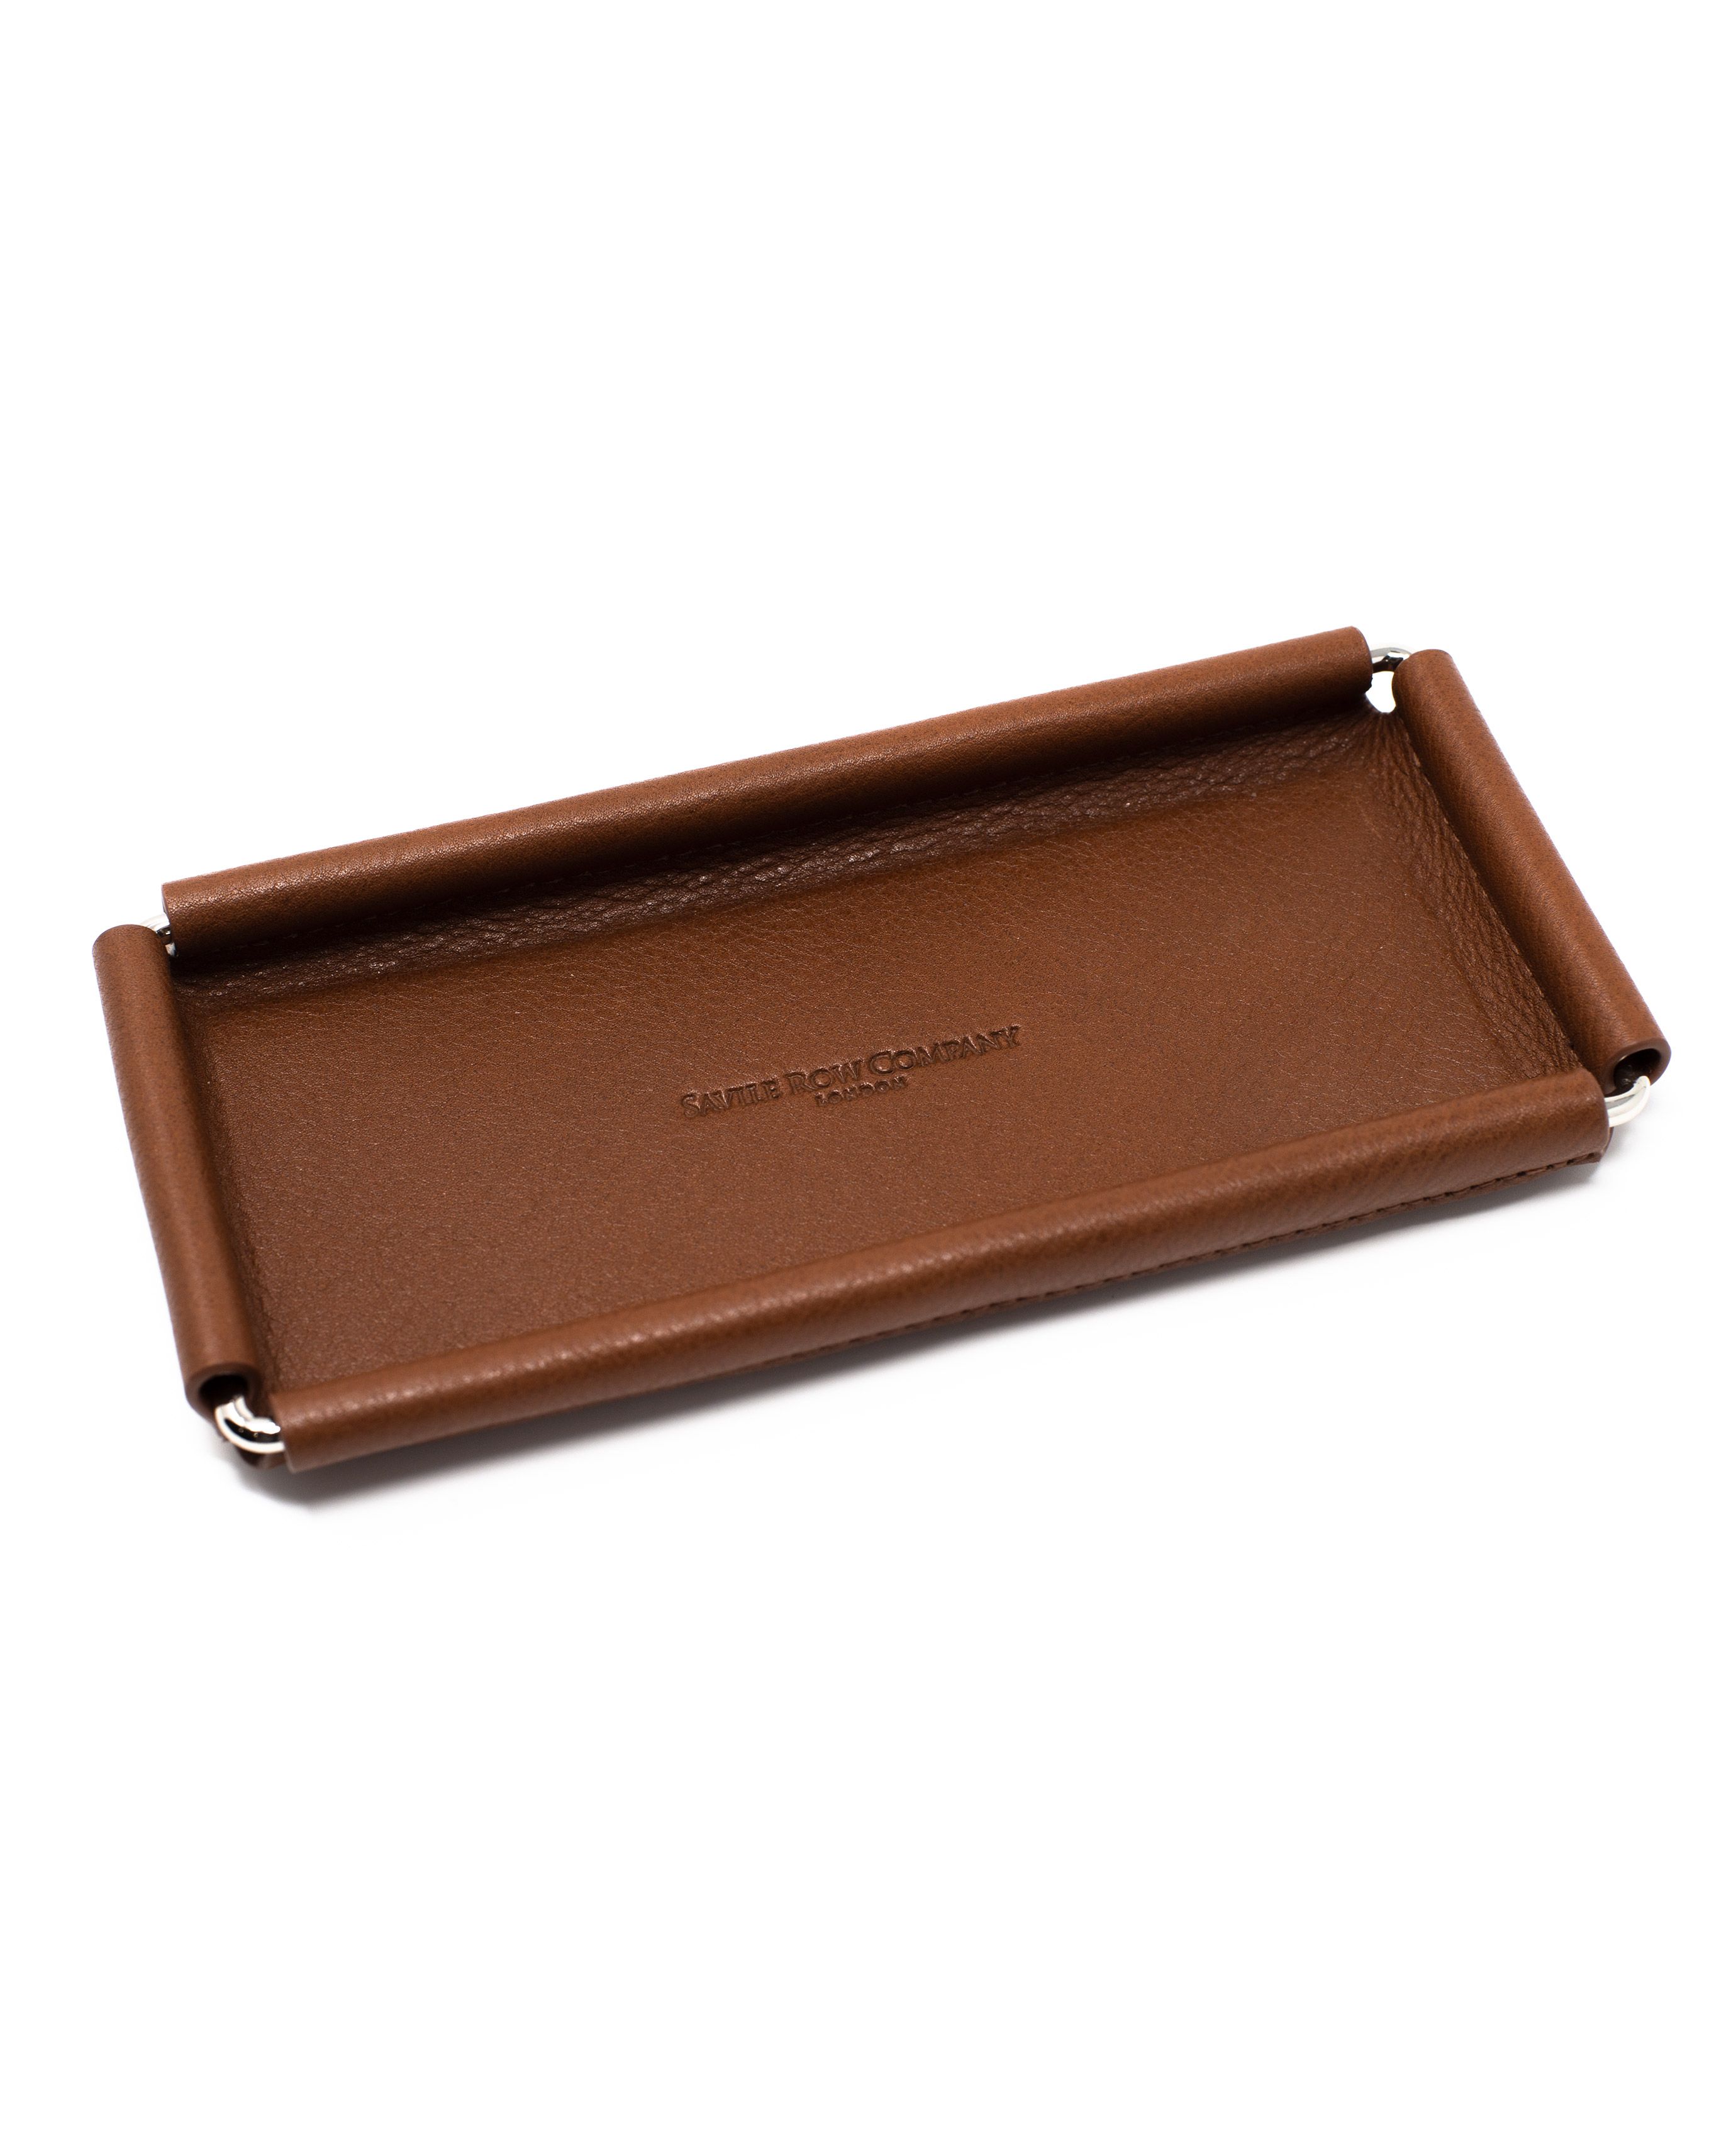 Luxury tan leather storage desk tray with suedette lining | Savile Row Co